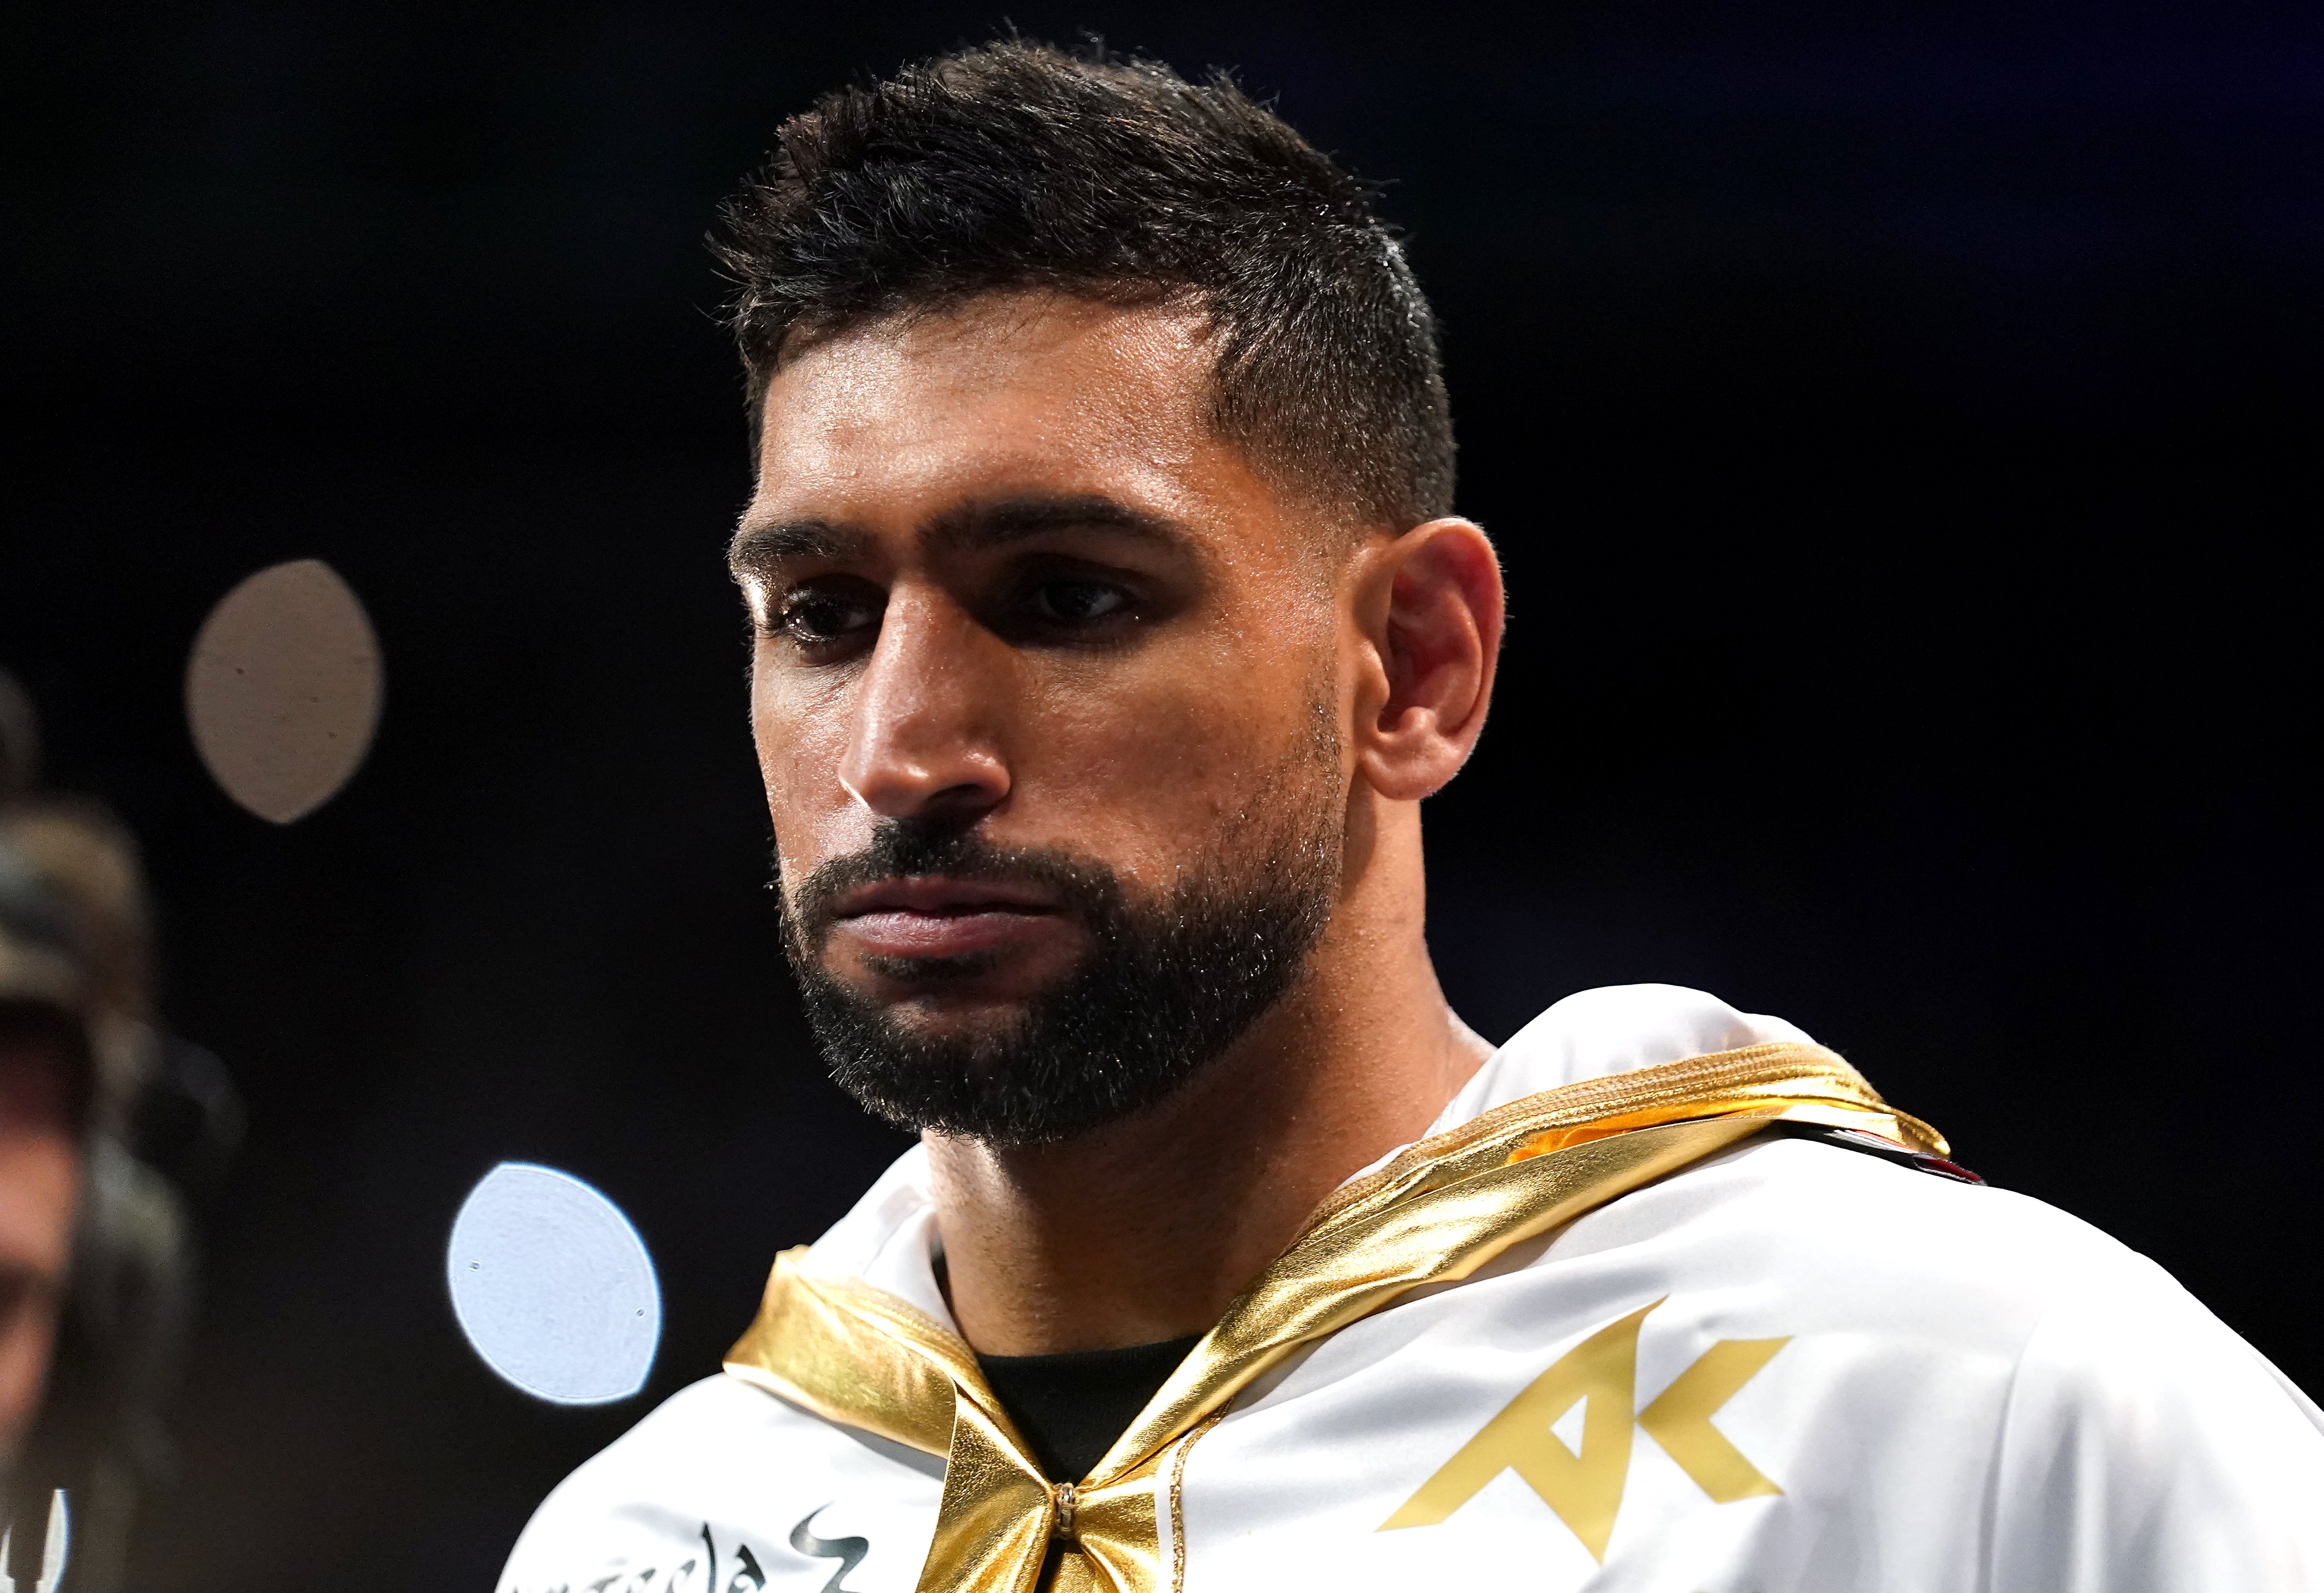 Amir Khan denies cheating amid two-year ban for failed drug test after Kell Brook fight The Independent